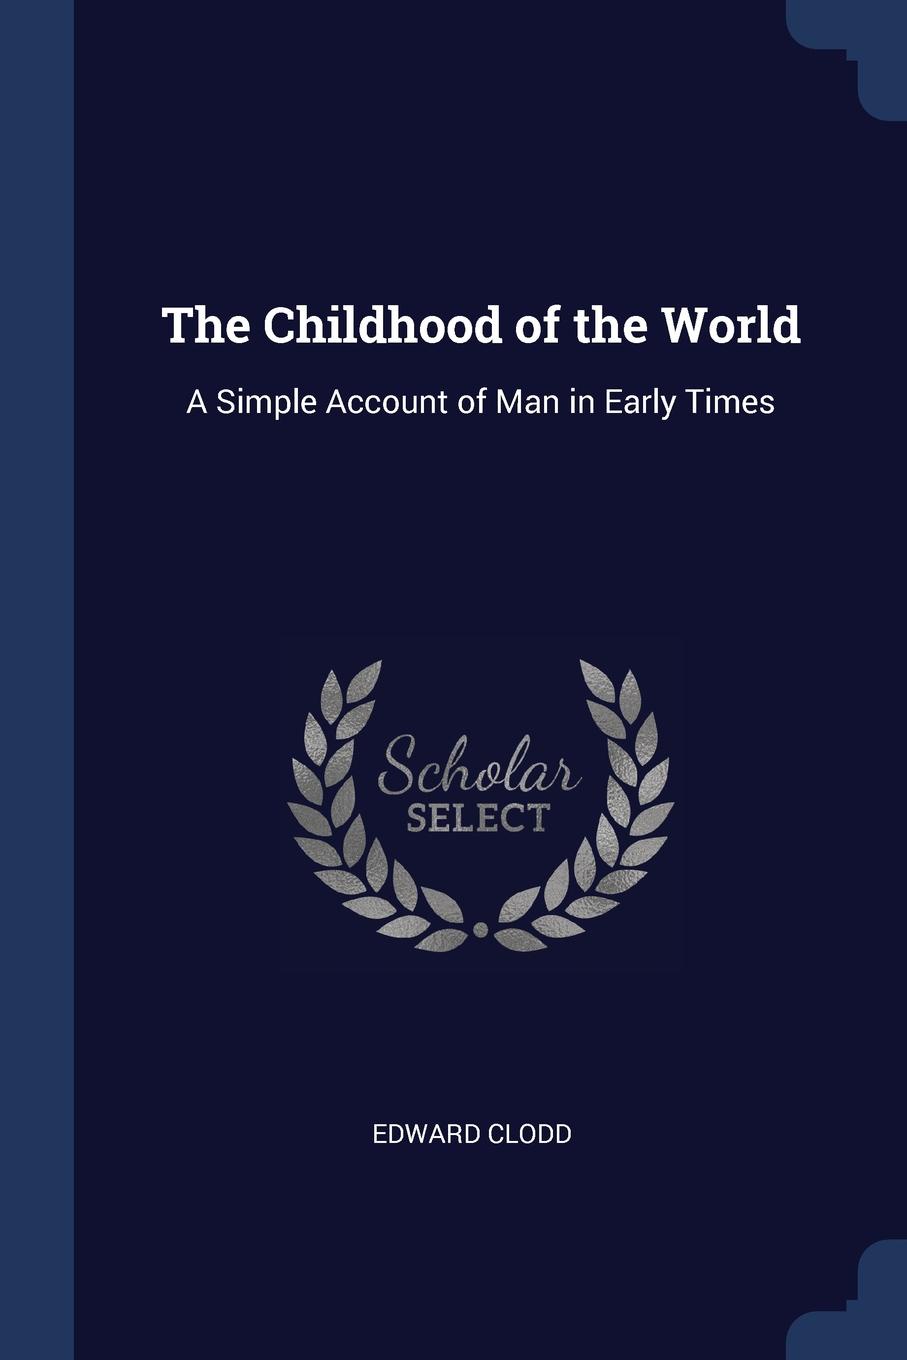 The Childhood of the World. A Simple Account of Man in Early Times